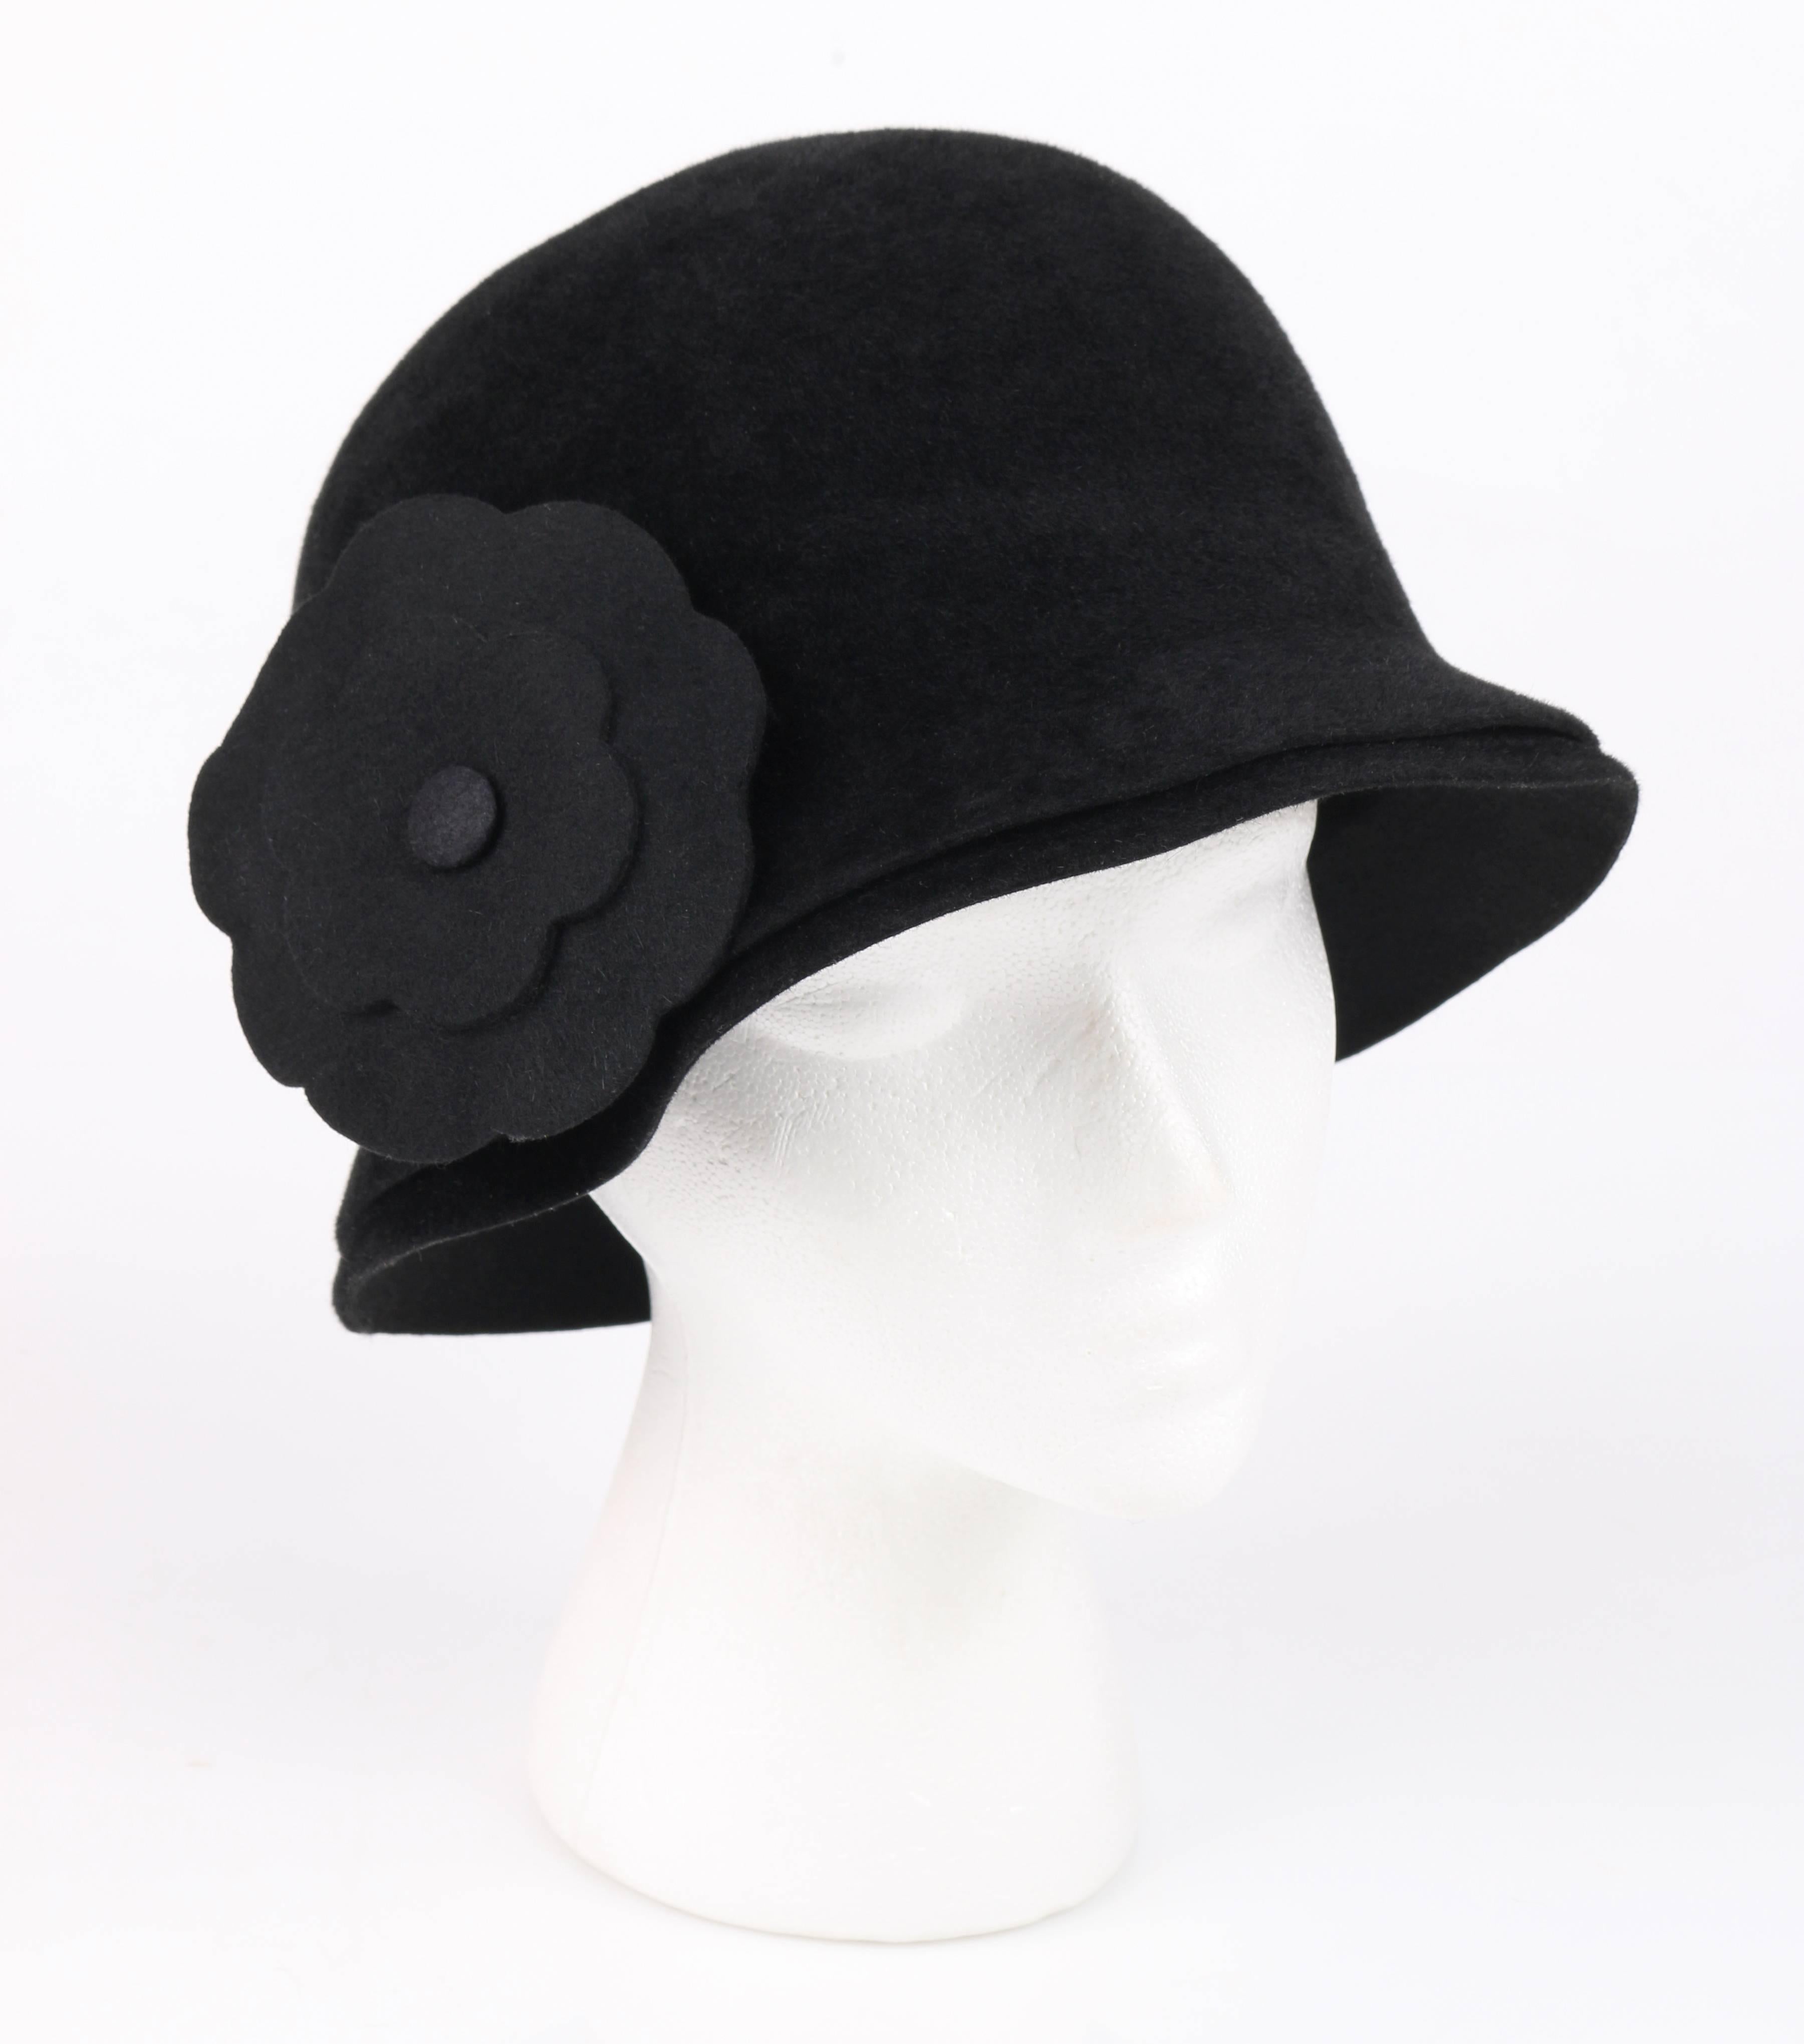 Chanel A/W 1998 black fur felt cloche style hat. Fur felt bell shaped body. Double brim. Black gross grain ribbon along interior edge. Unlined. Matching camellia flower removable brooch. Black stem with gold-toned needle clasp closure. Gold tag